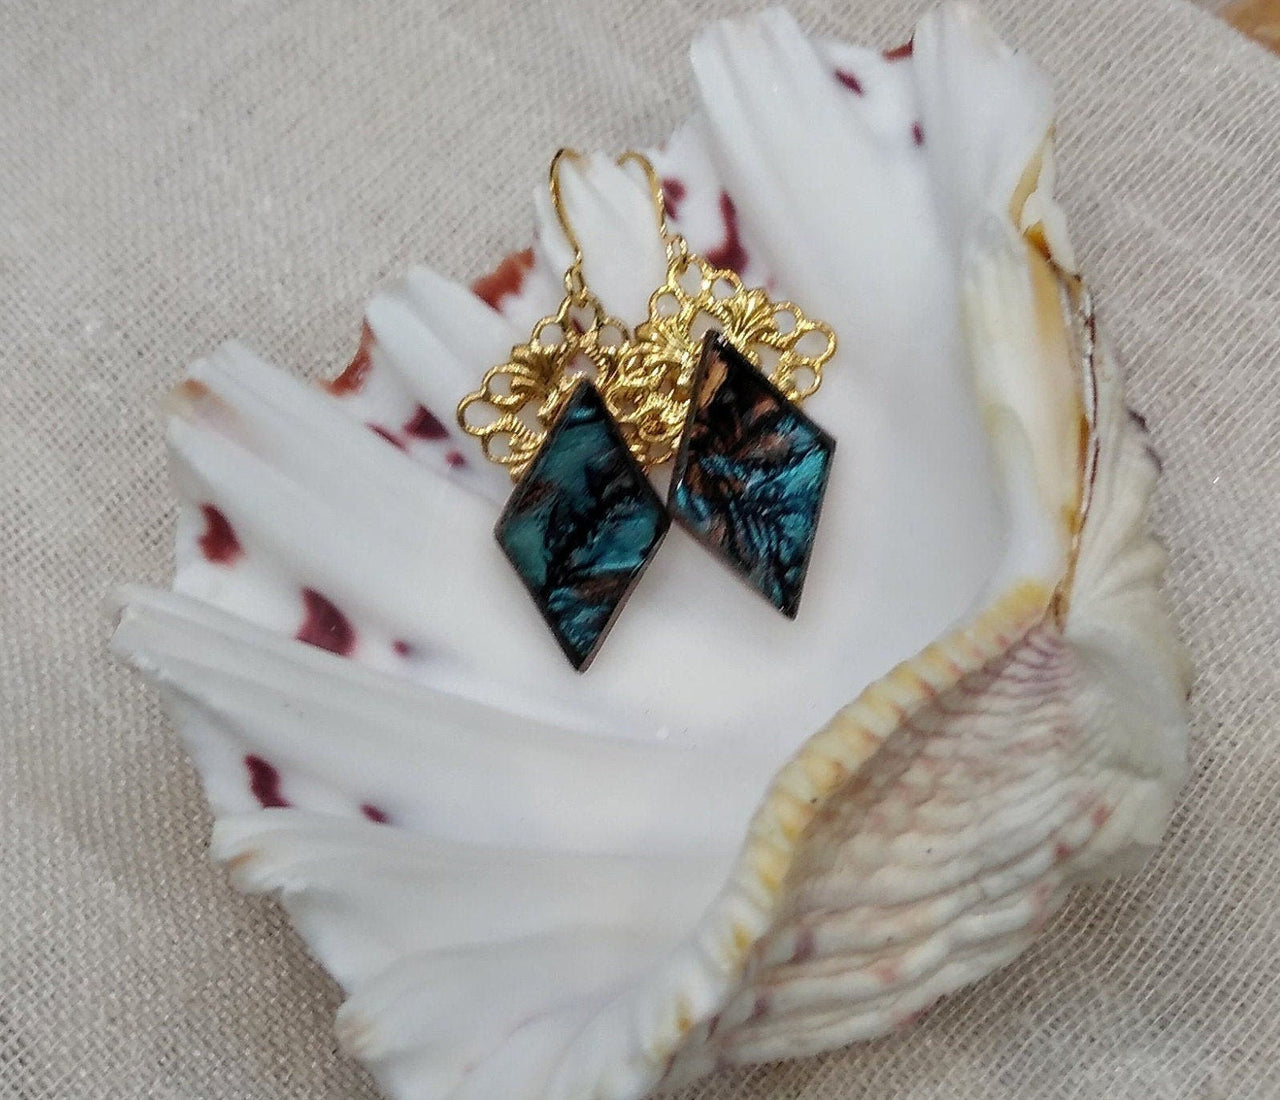 Aqua and champagne Van Gogh stained glass earrings